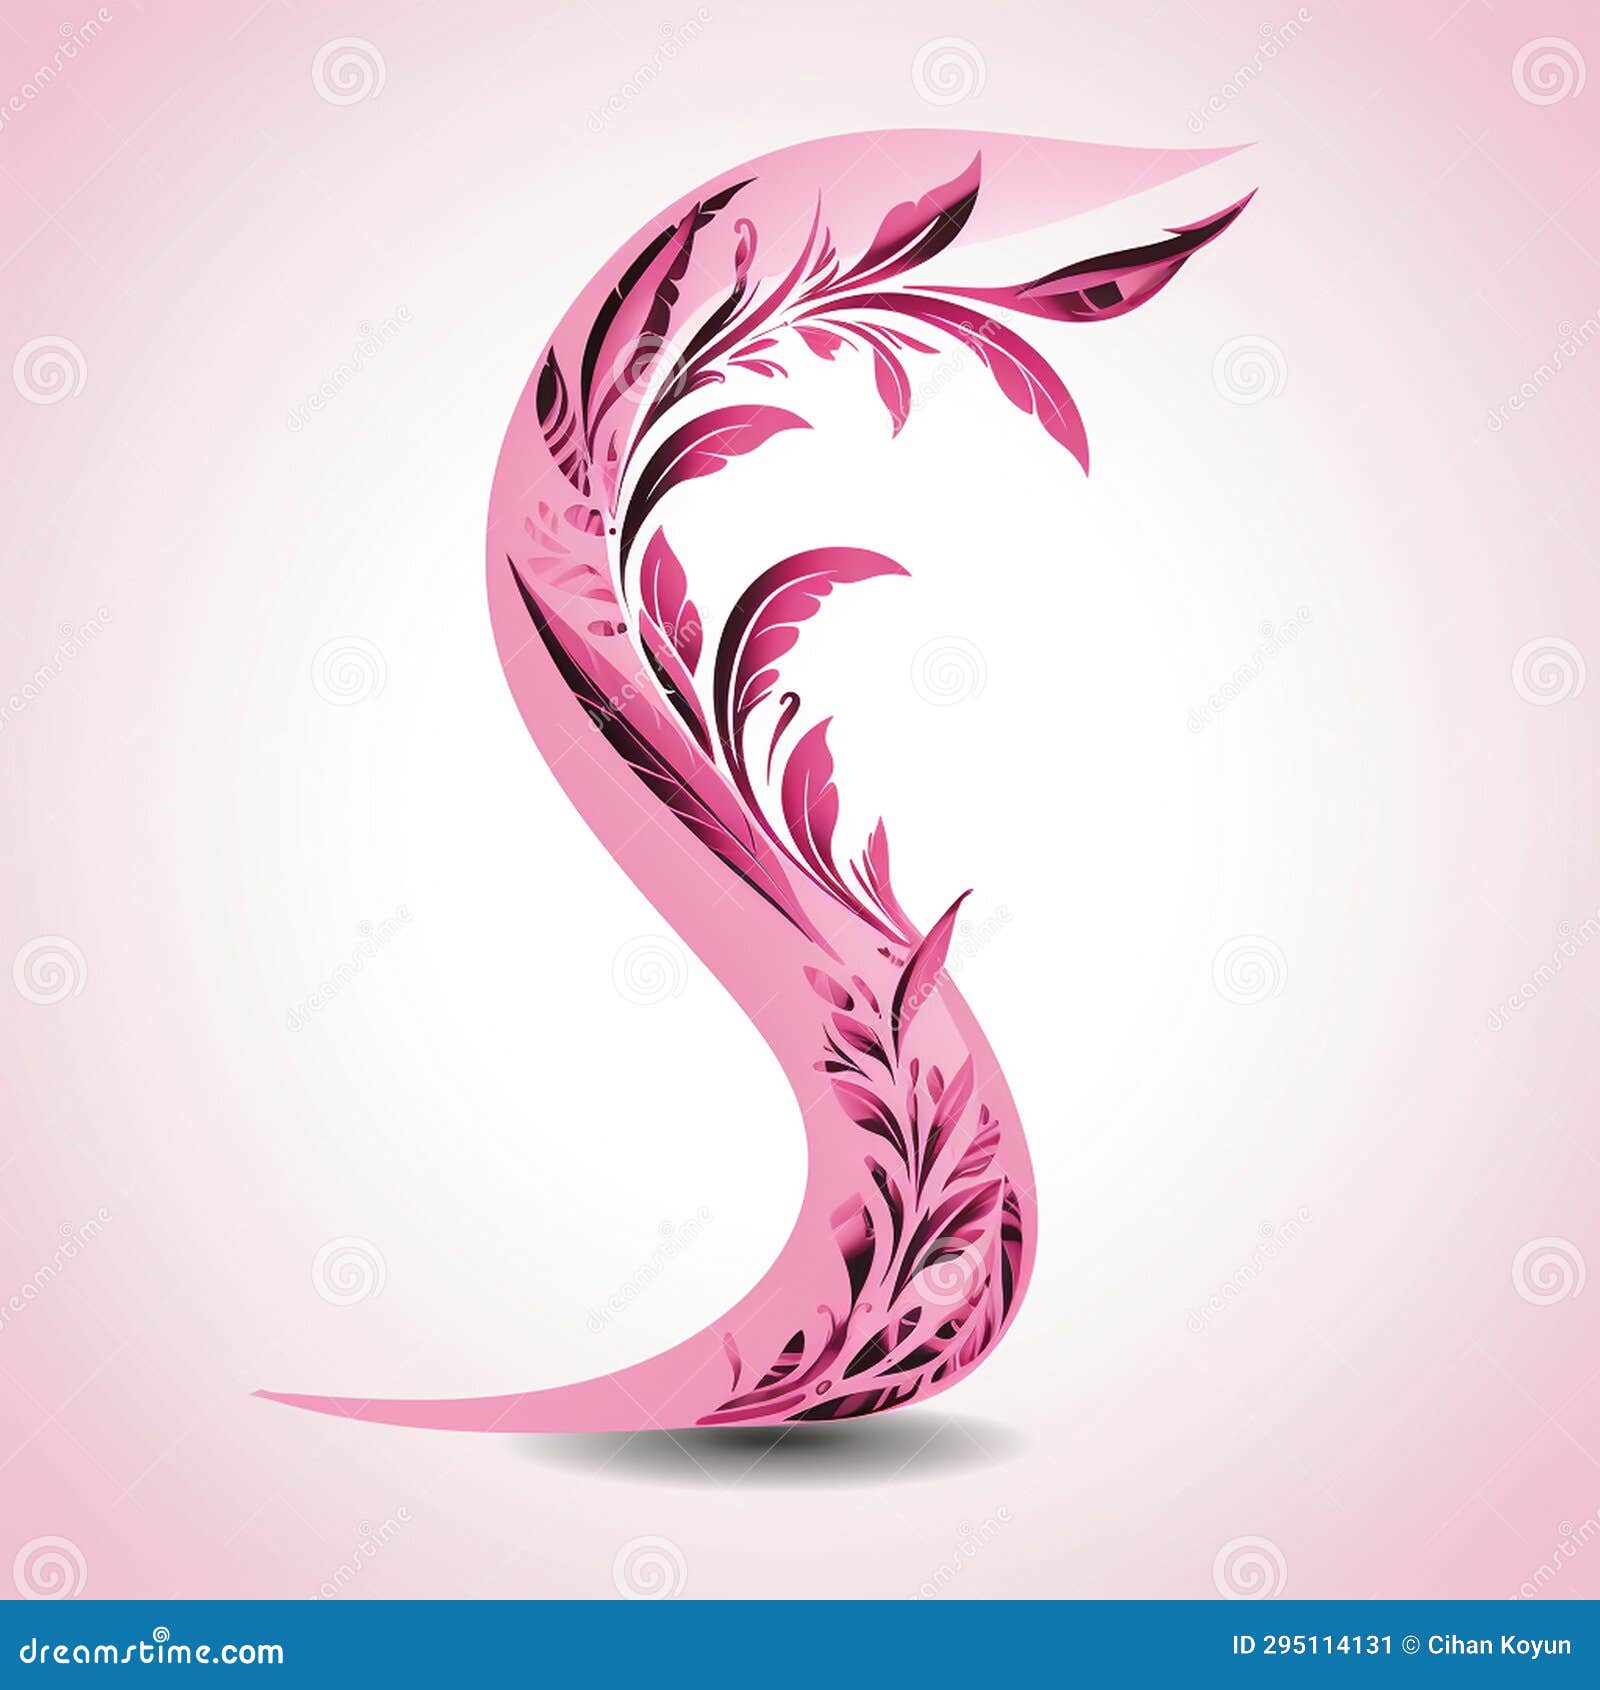 pink ribbon on white background high resolution and royaltyfree